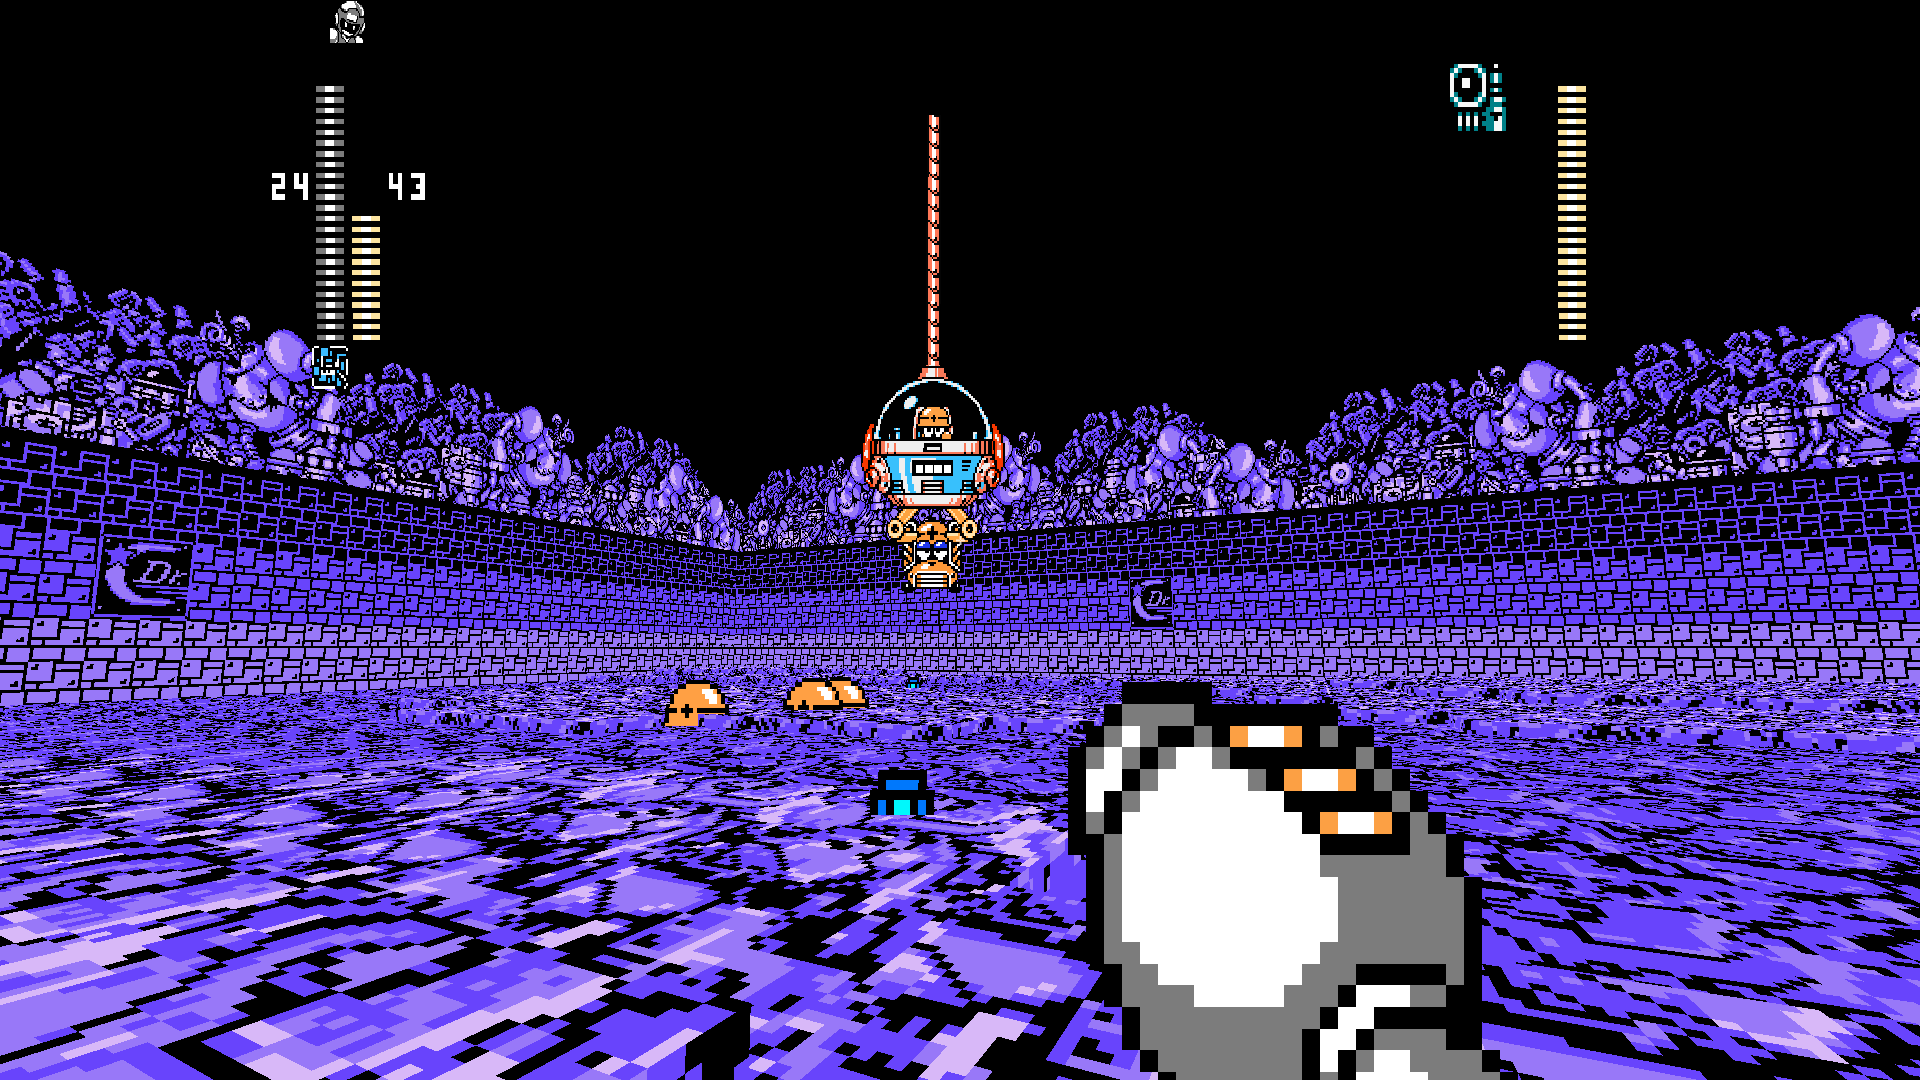 A player fighting a fun twist on Megaman 4's Cossack Catcher.